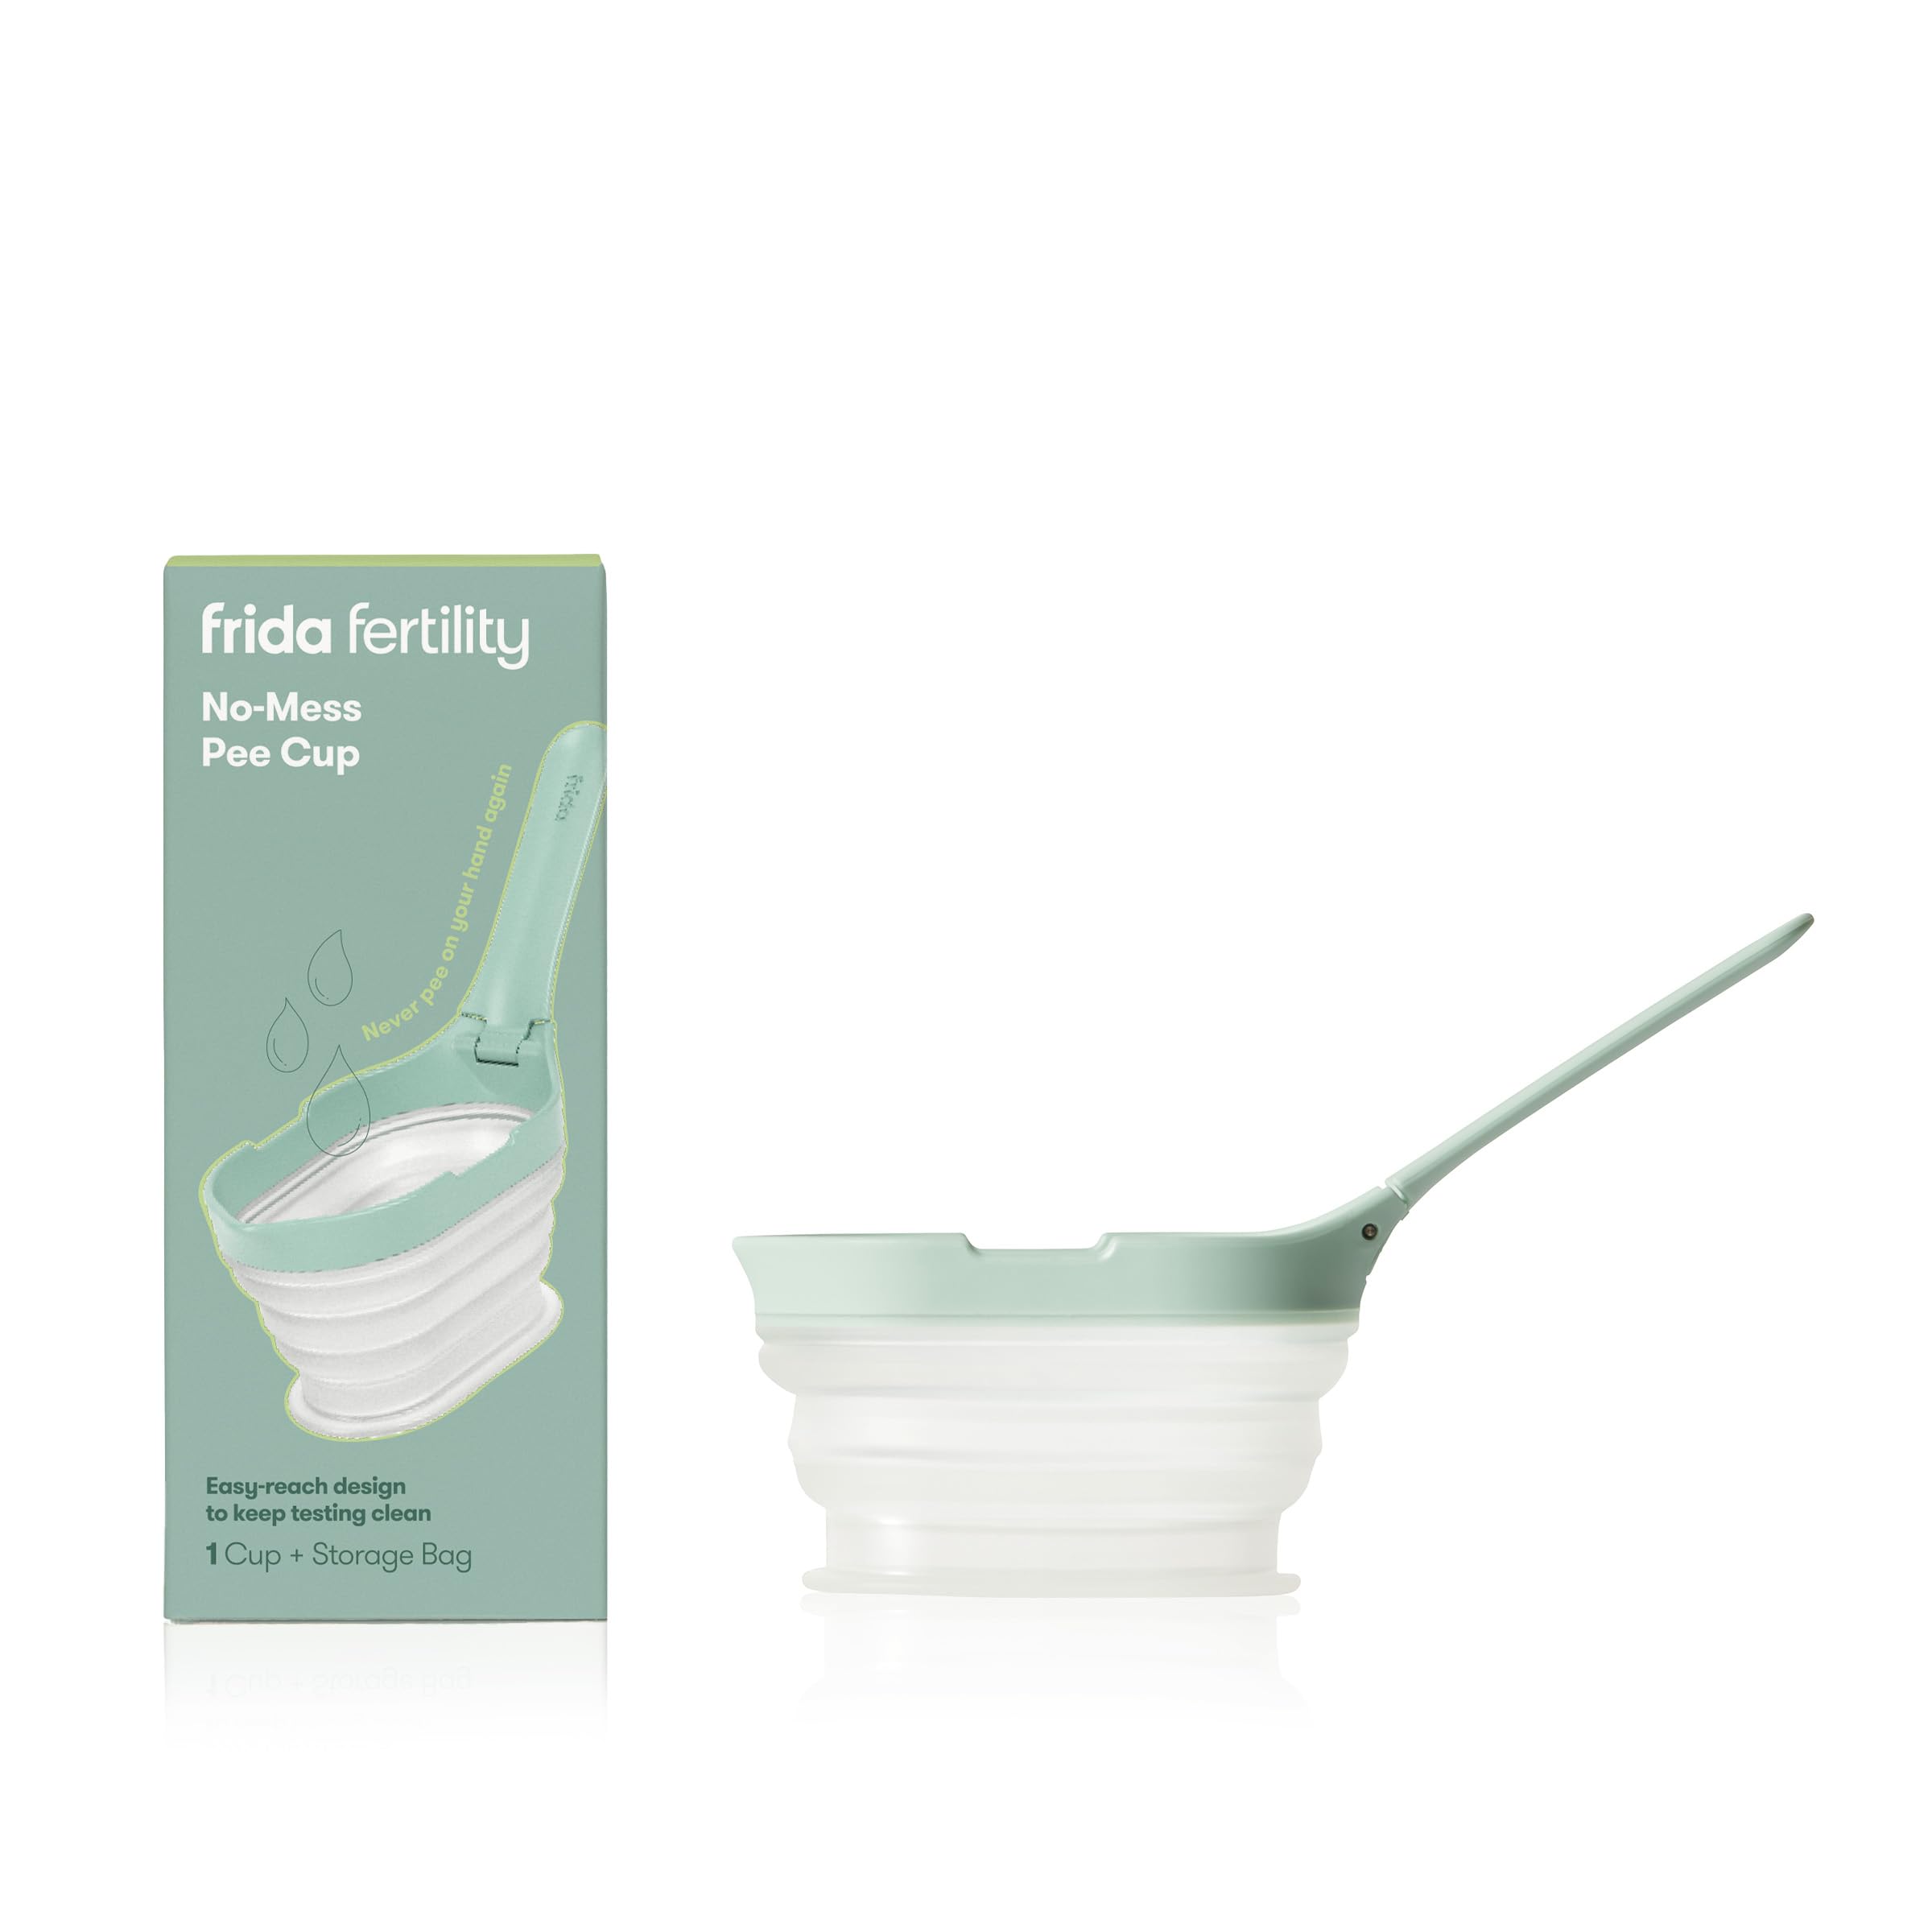 Frida Fertility No-Mess Pee Cup, Portable & Reusable with Storage Bag, Specimen Cup for Ovulation and Pregnancy Testing to Collect Urine Sample